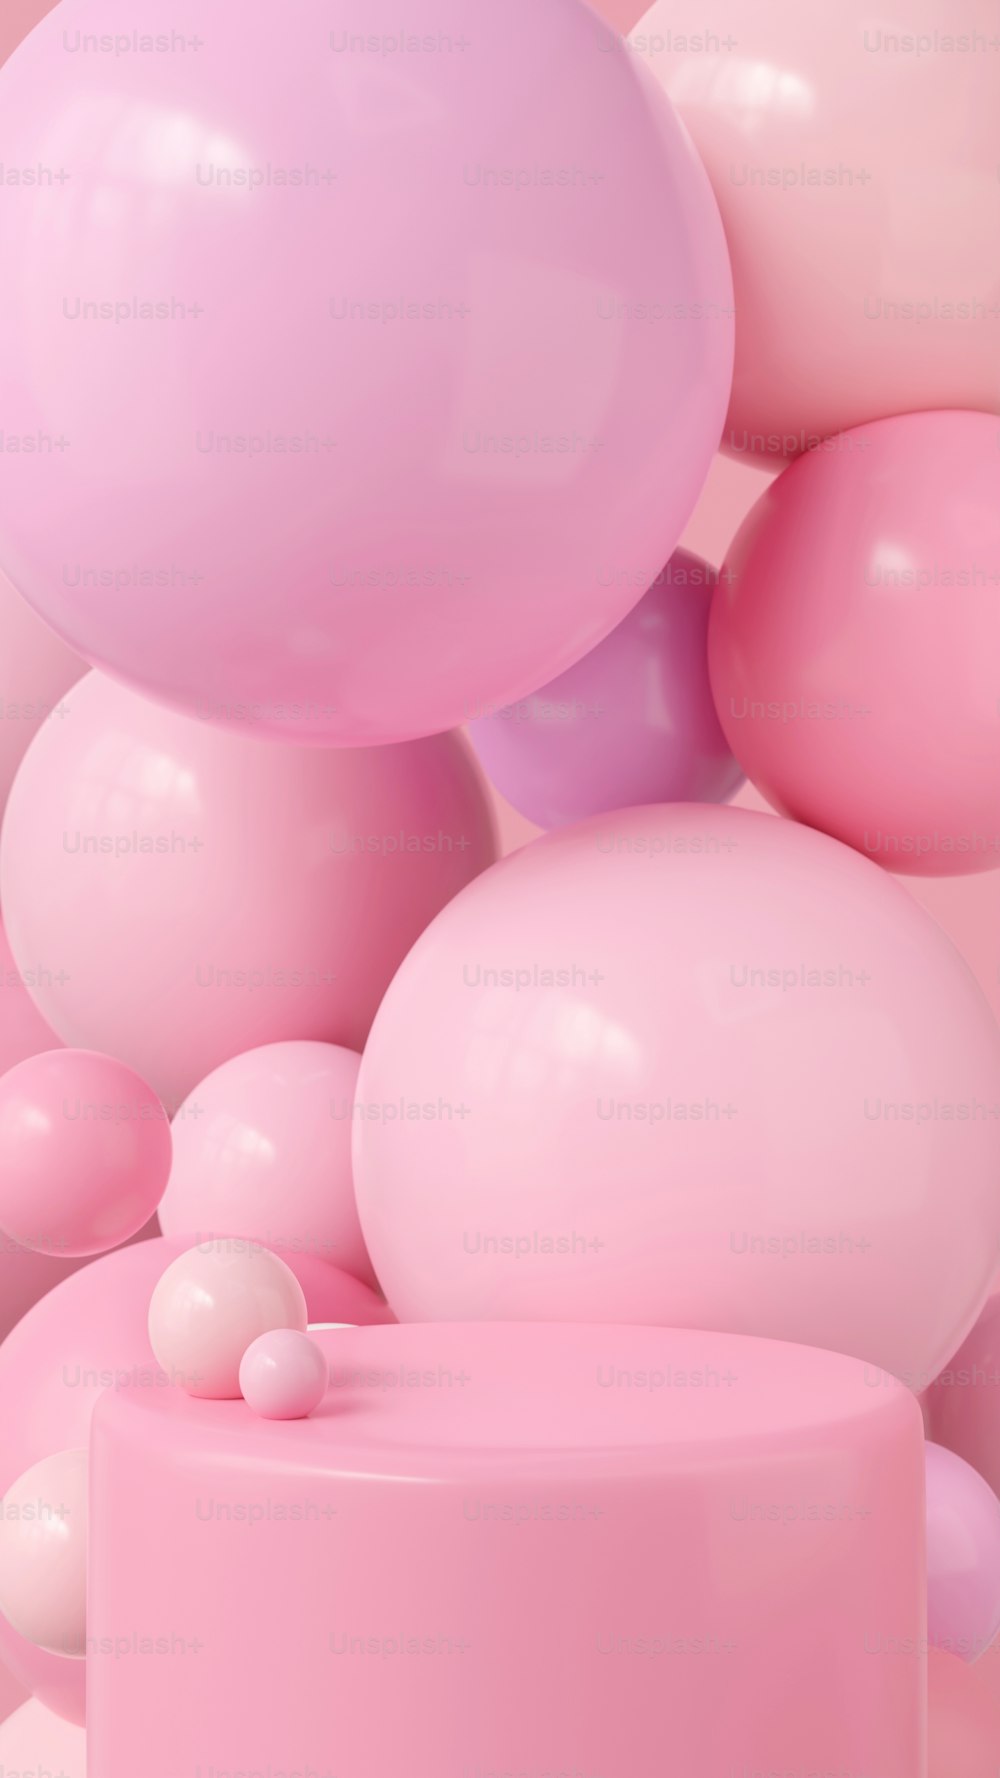 a pink cake surrounded by balloons in the air